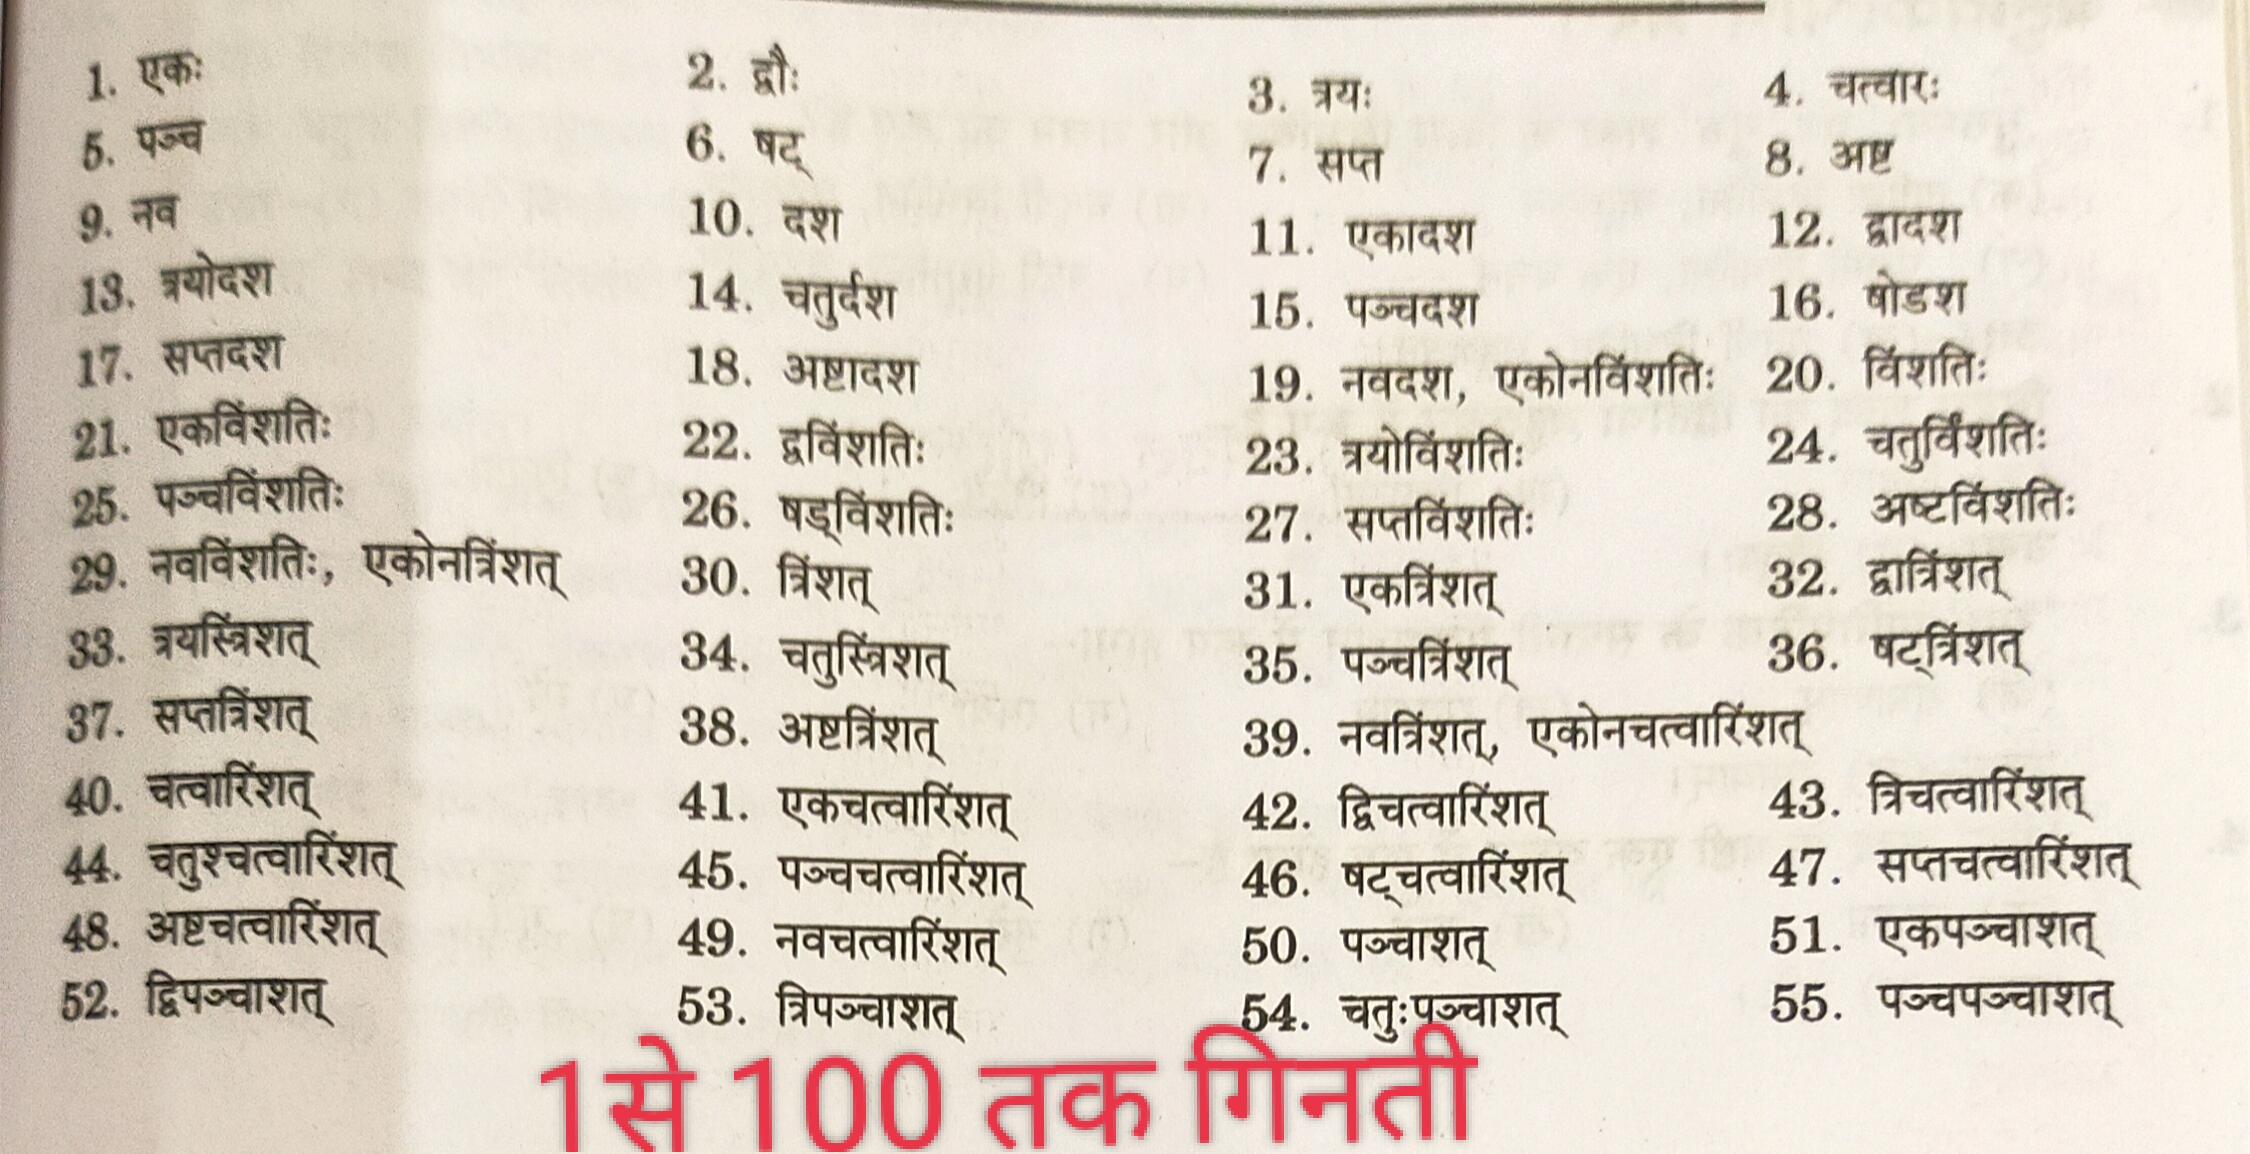 Sanskrit Counting 1 to 100 